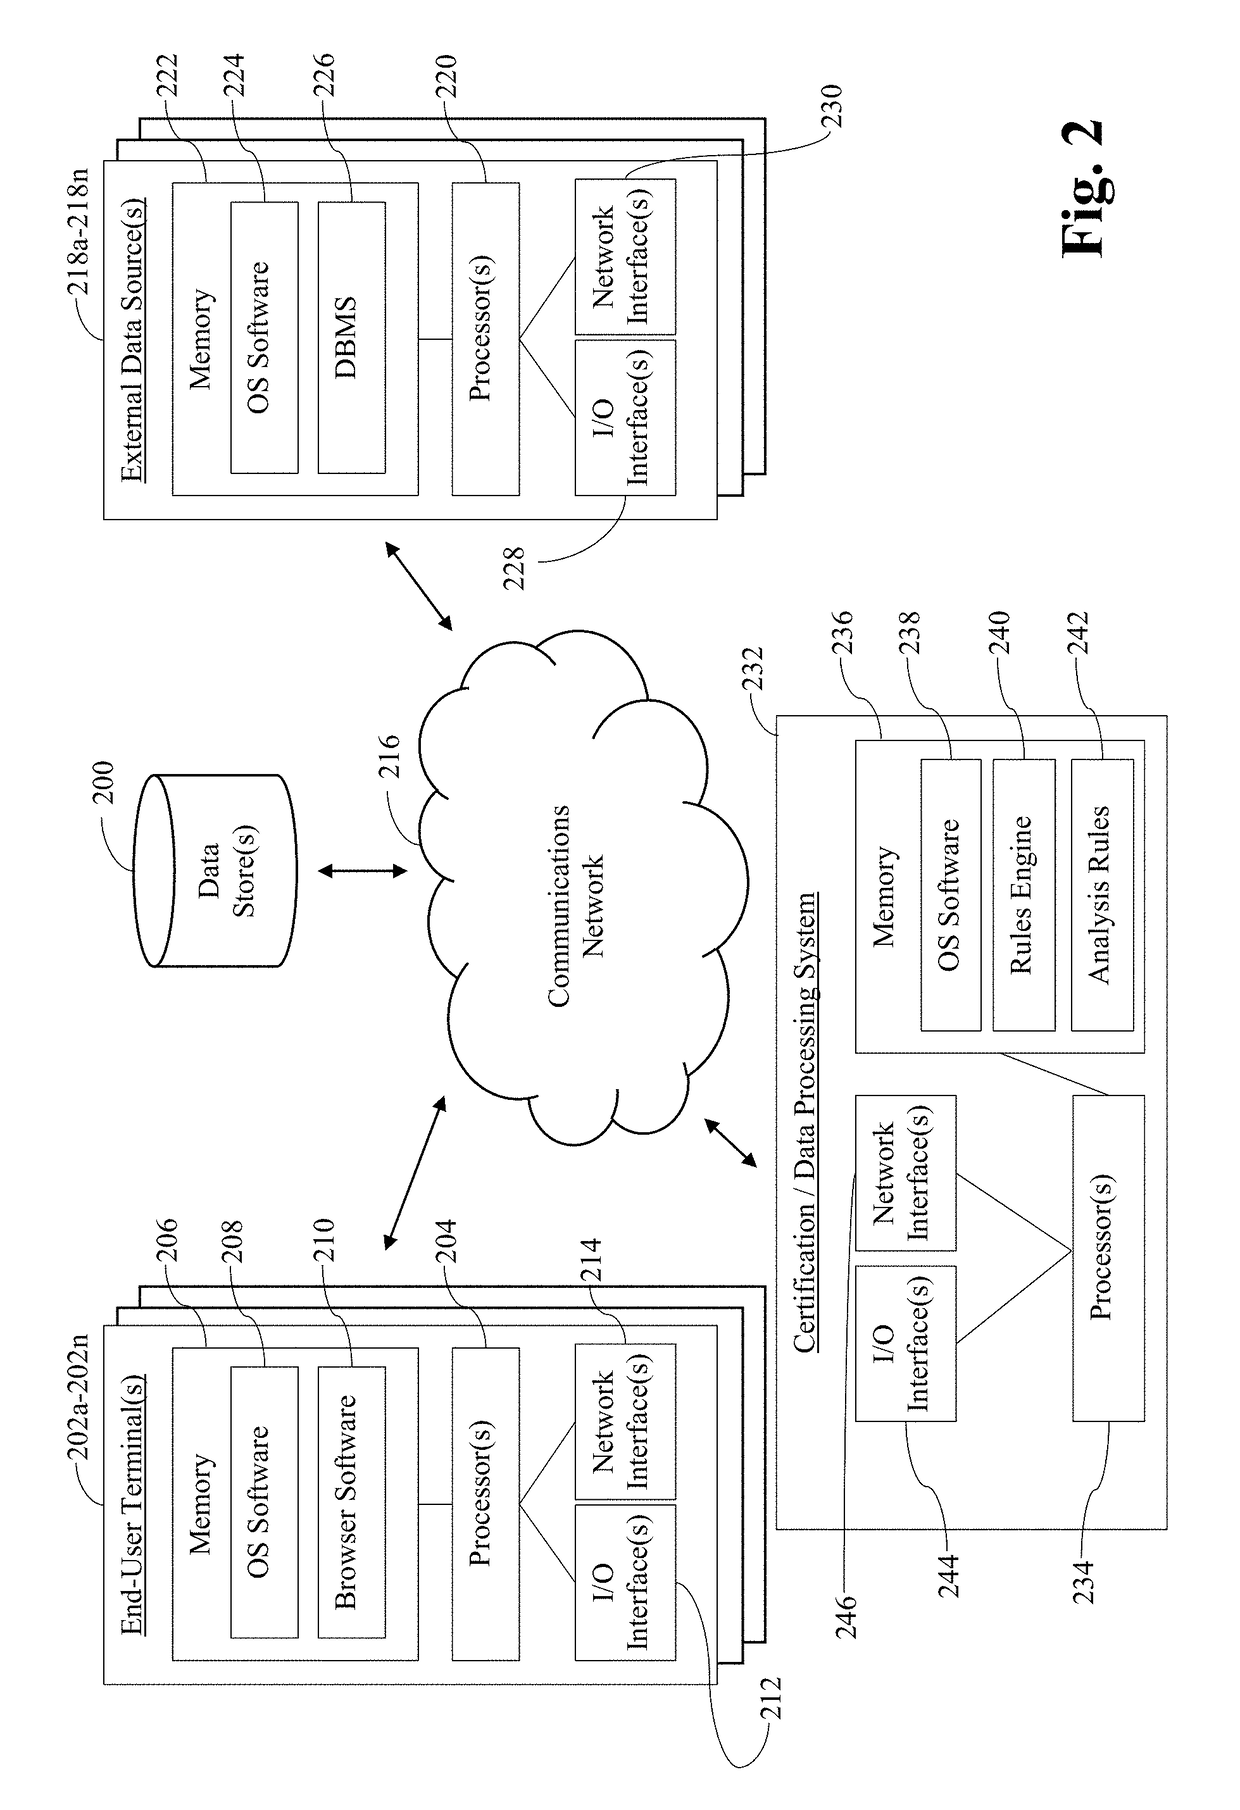 Systems and/or methods for enabling cooperatively-completed rules-based data analytics of potentially sensitive data